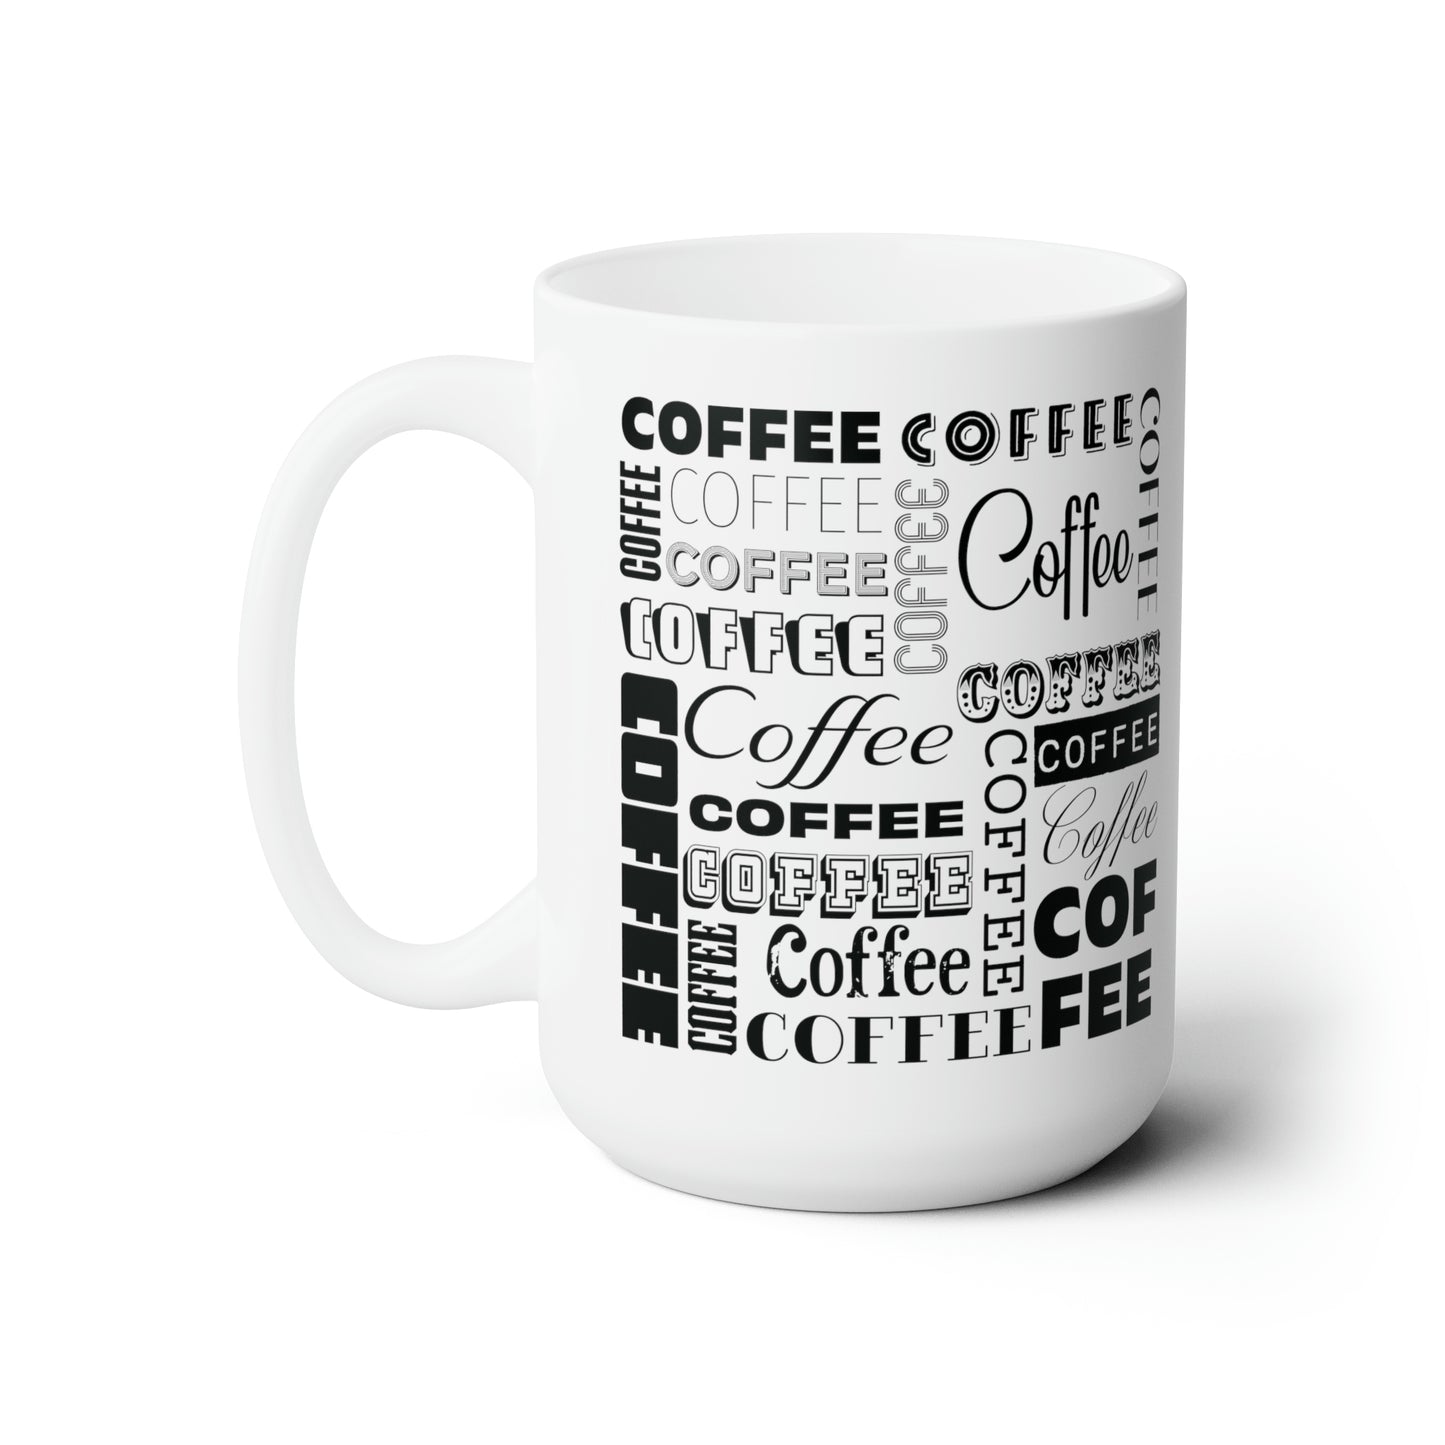 Coffee Lovers Mug For Hot Java Cup For Coffee Drinkers Gift